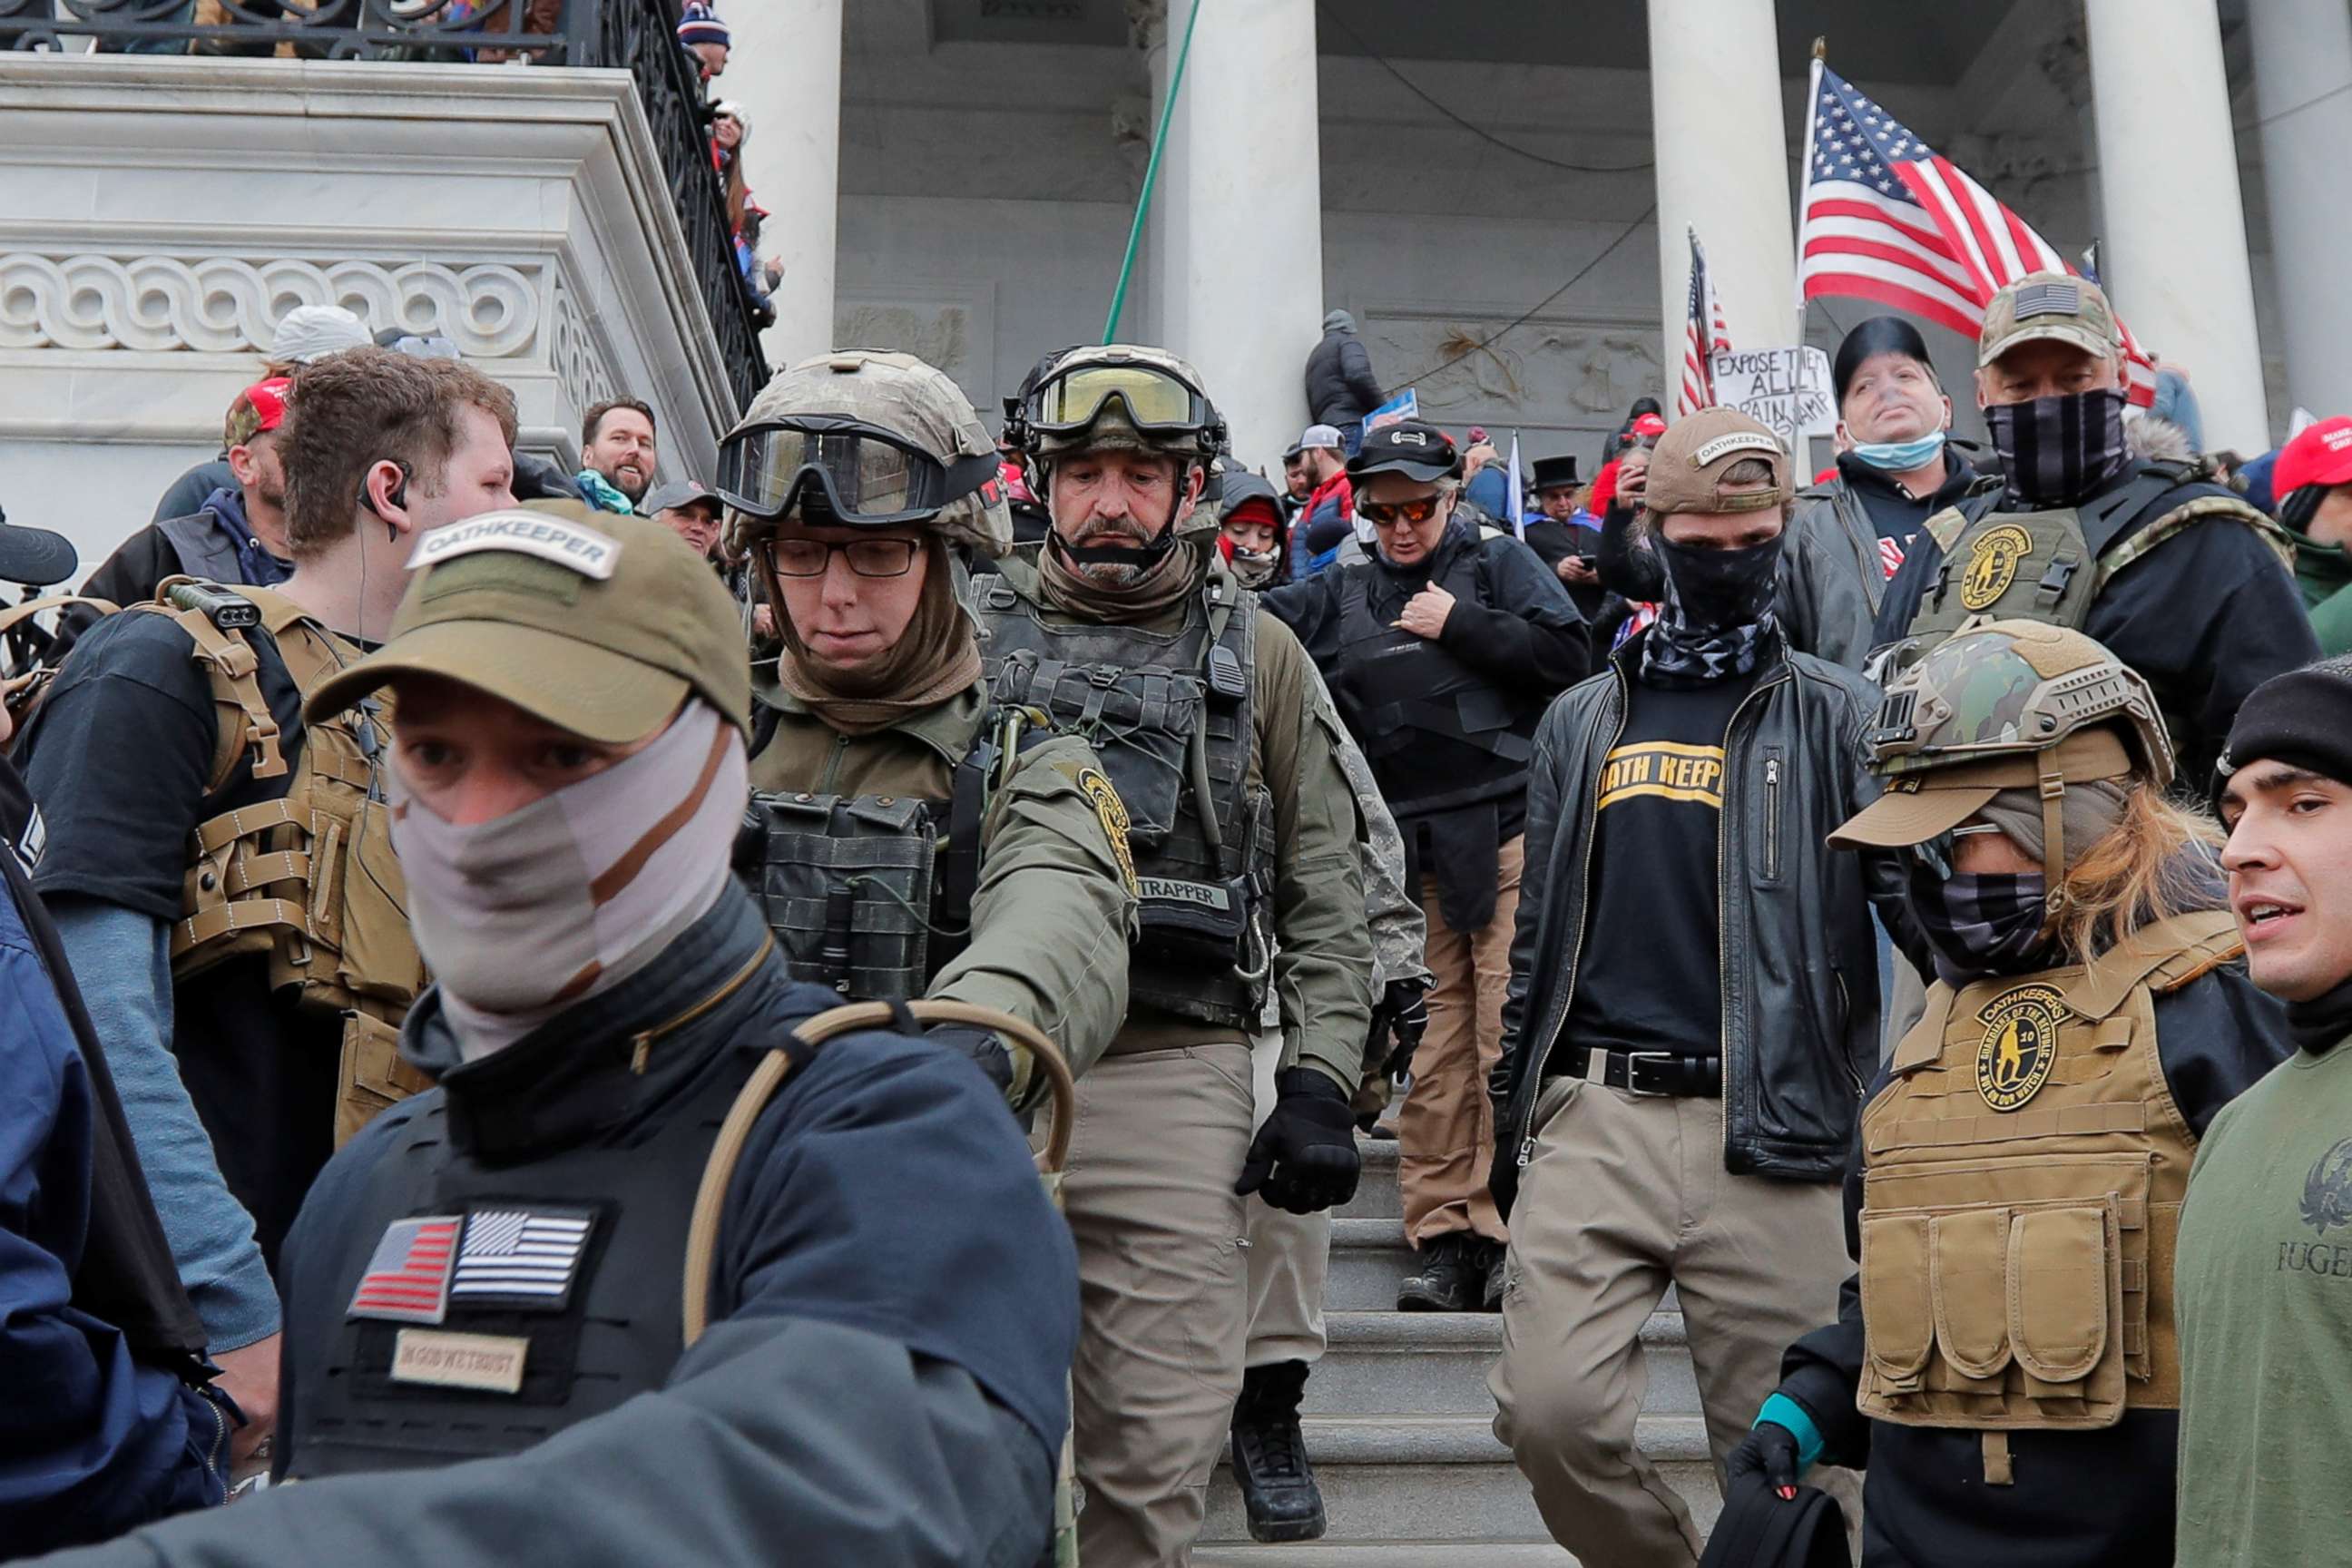 PHOTO: Jessica Marie Watkins, 2nd from left, and Donovan Ray Crowl, center, both from Ohio, march down the east front steps of the U.S. Capitol with members of the Oath Keepers militia group in Washington, Jan. 6, 2021.